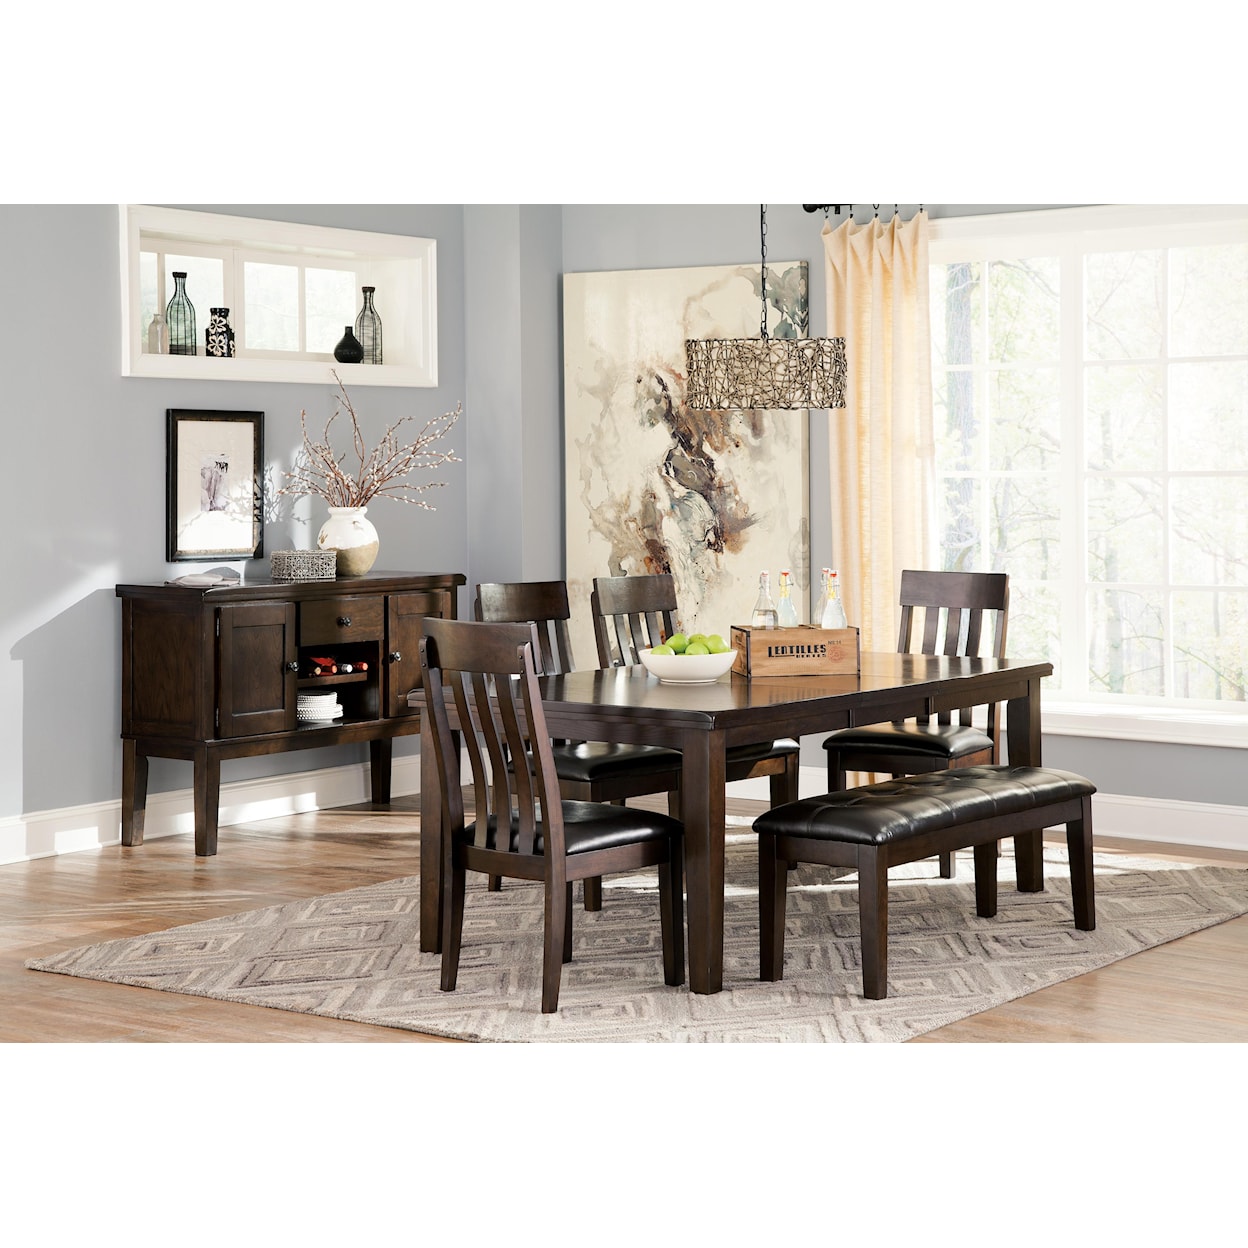 Signature Design by Ashley Furniture Haddigan Extending Dining Room Table